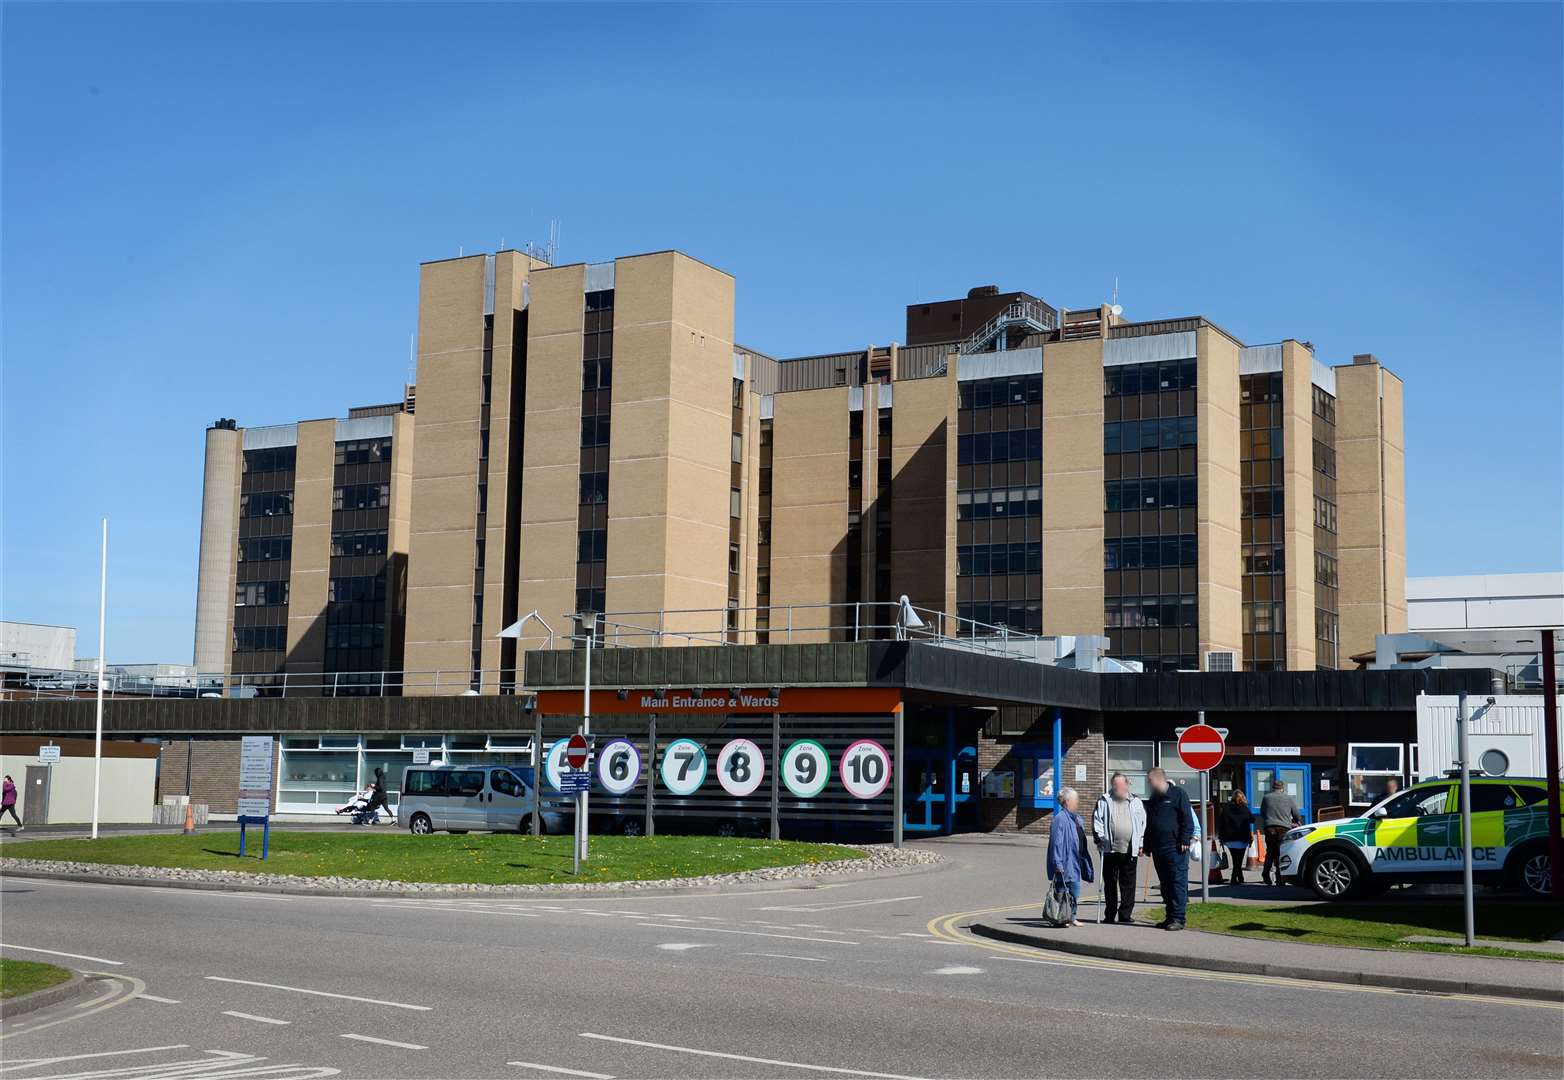 Ward 5C at Raigmore Hospital has been closed to new admissions today due to new cases presenting symptoms of norovirus.